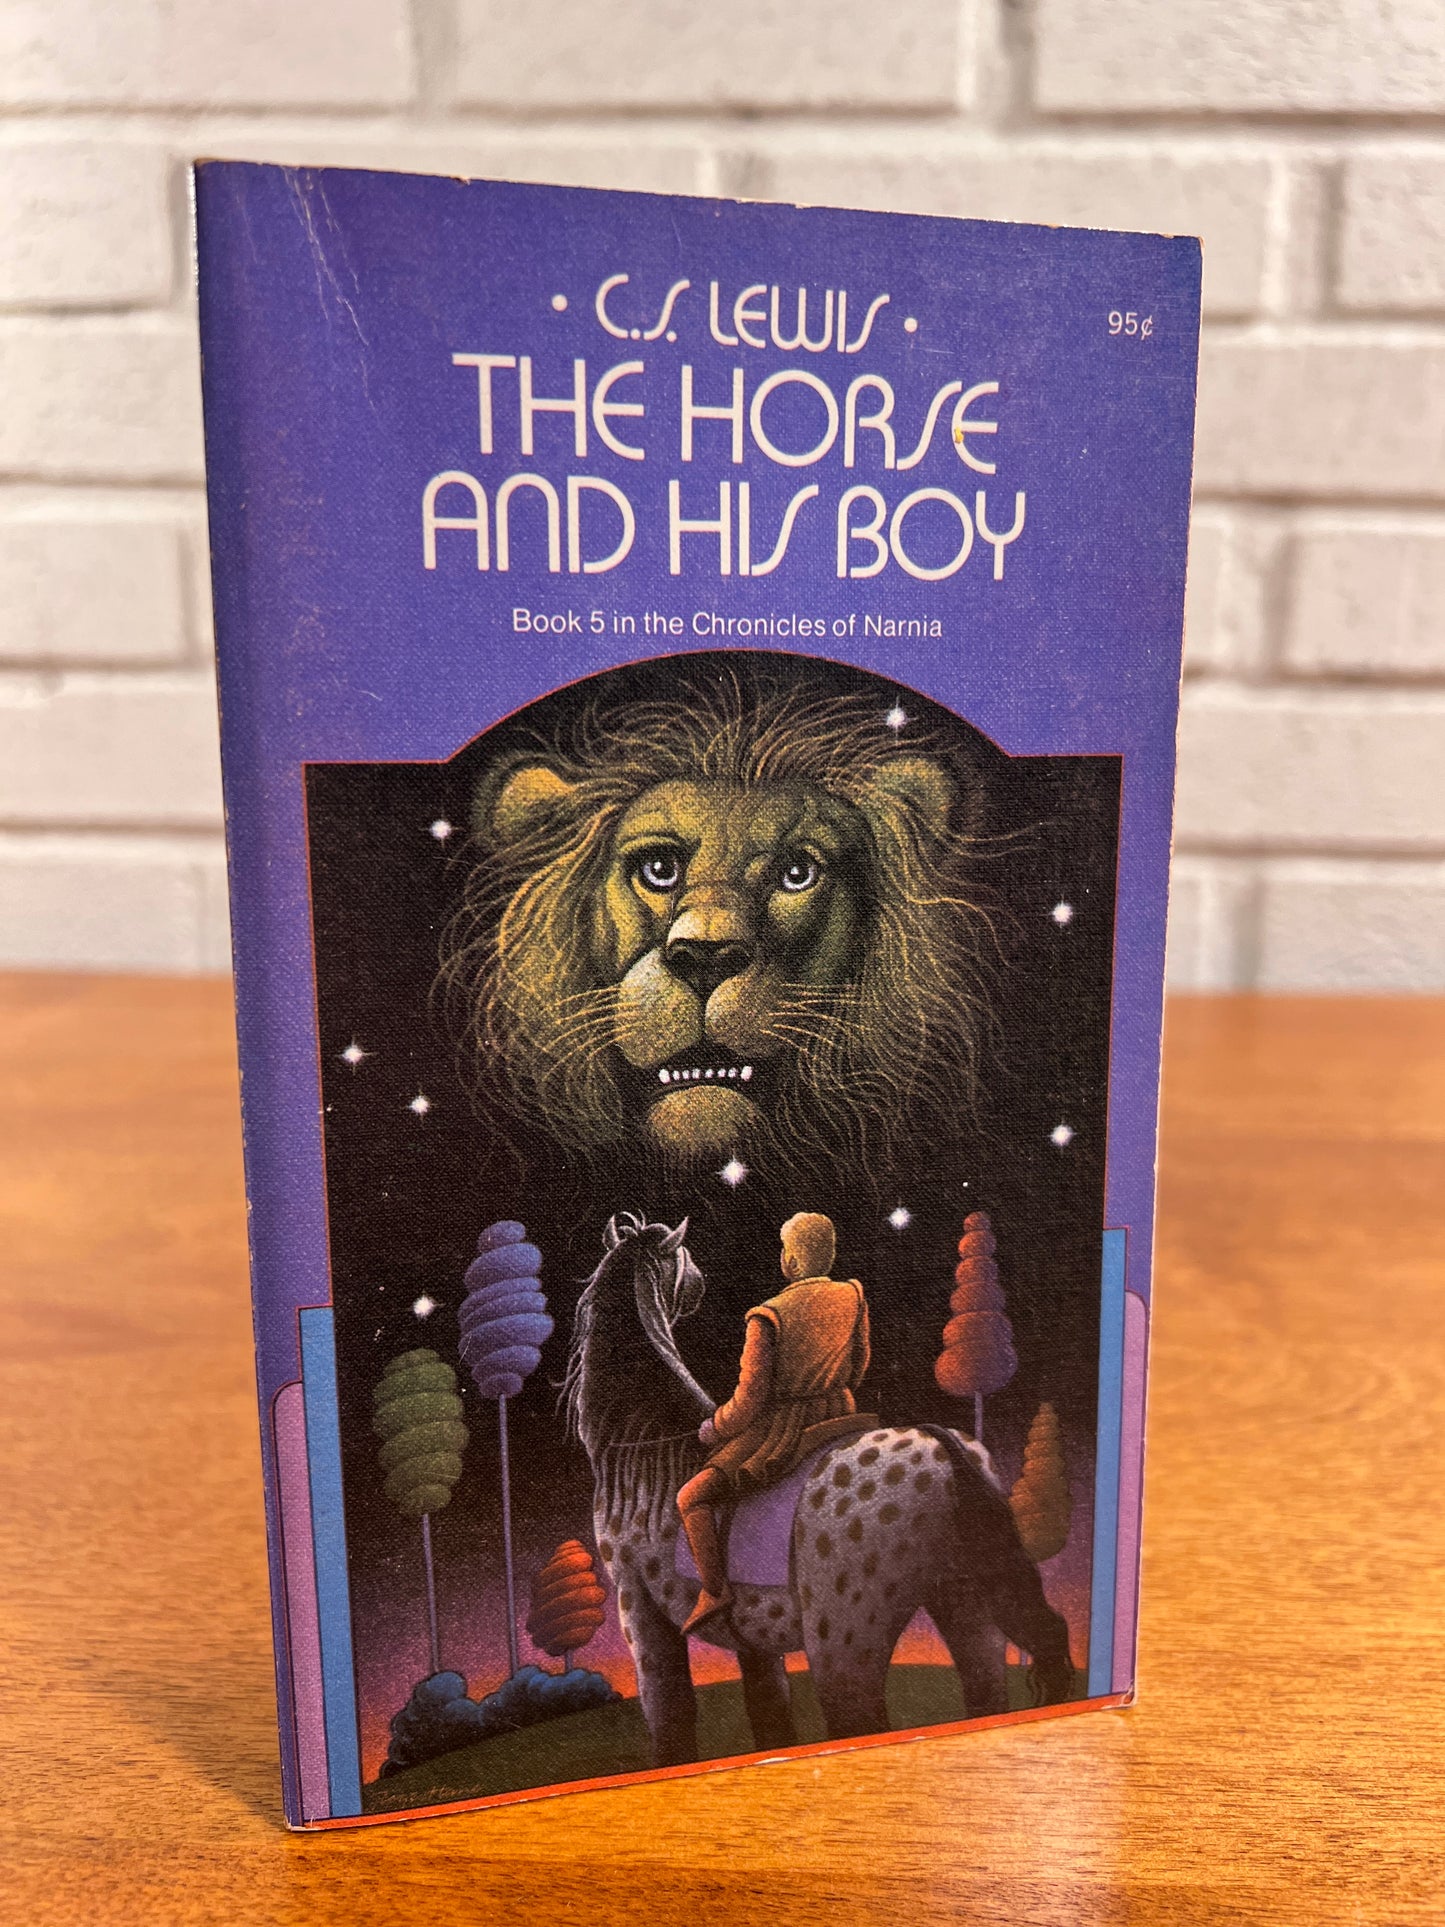 The Horse and His Boy The Chronicles of Narnia #5 by C.S. Lewis